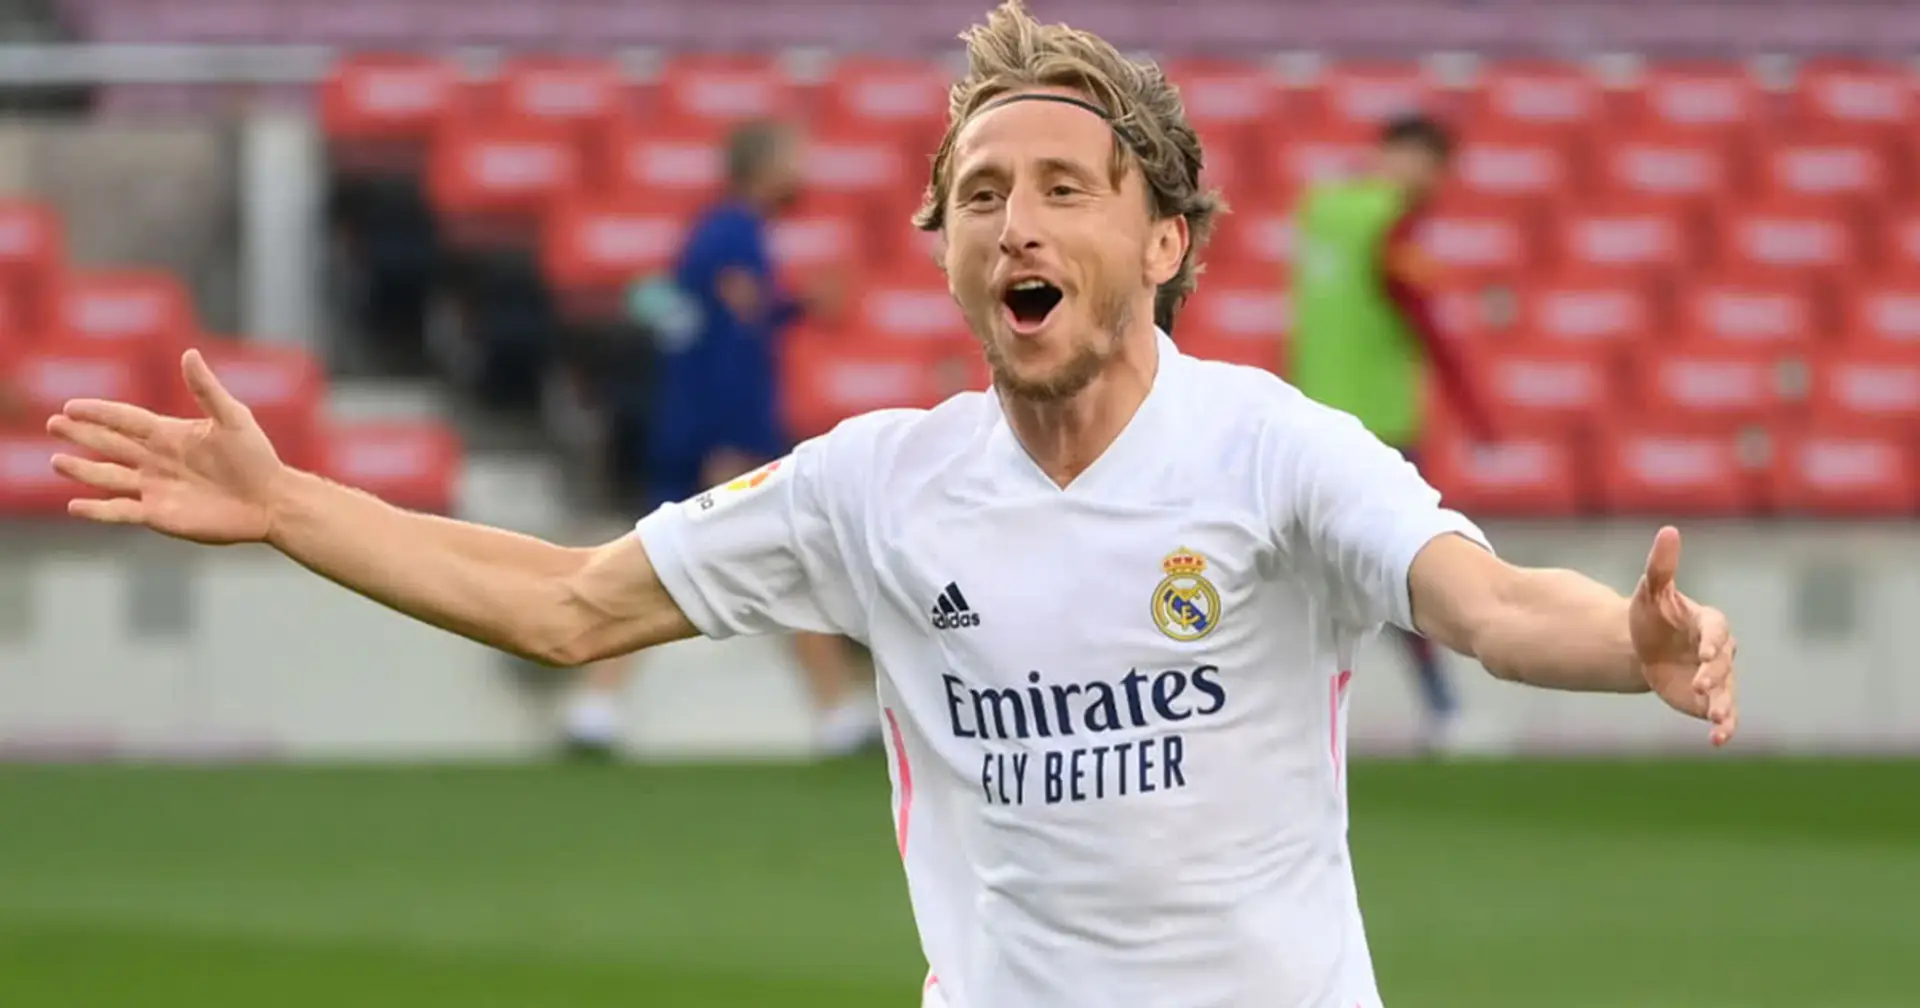 Exceptional: 35-year-old Modric set to start 10th game in a row for Real Madrid and Croatia